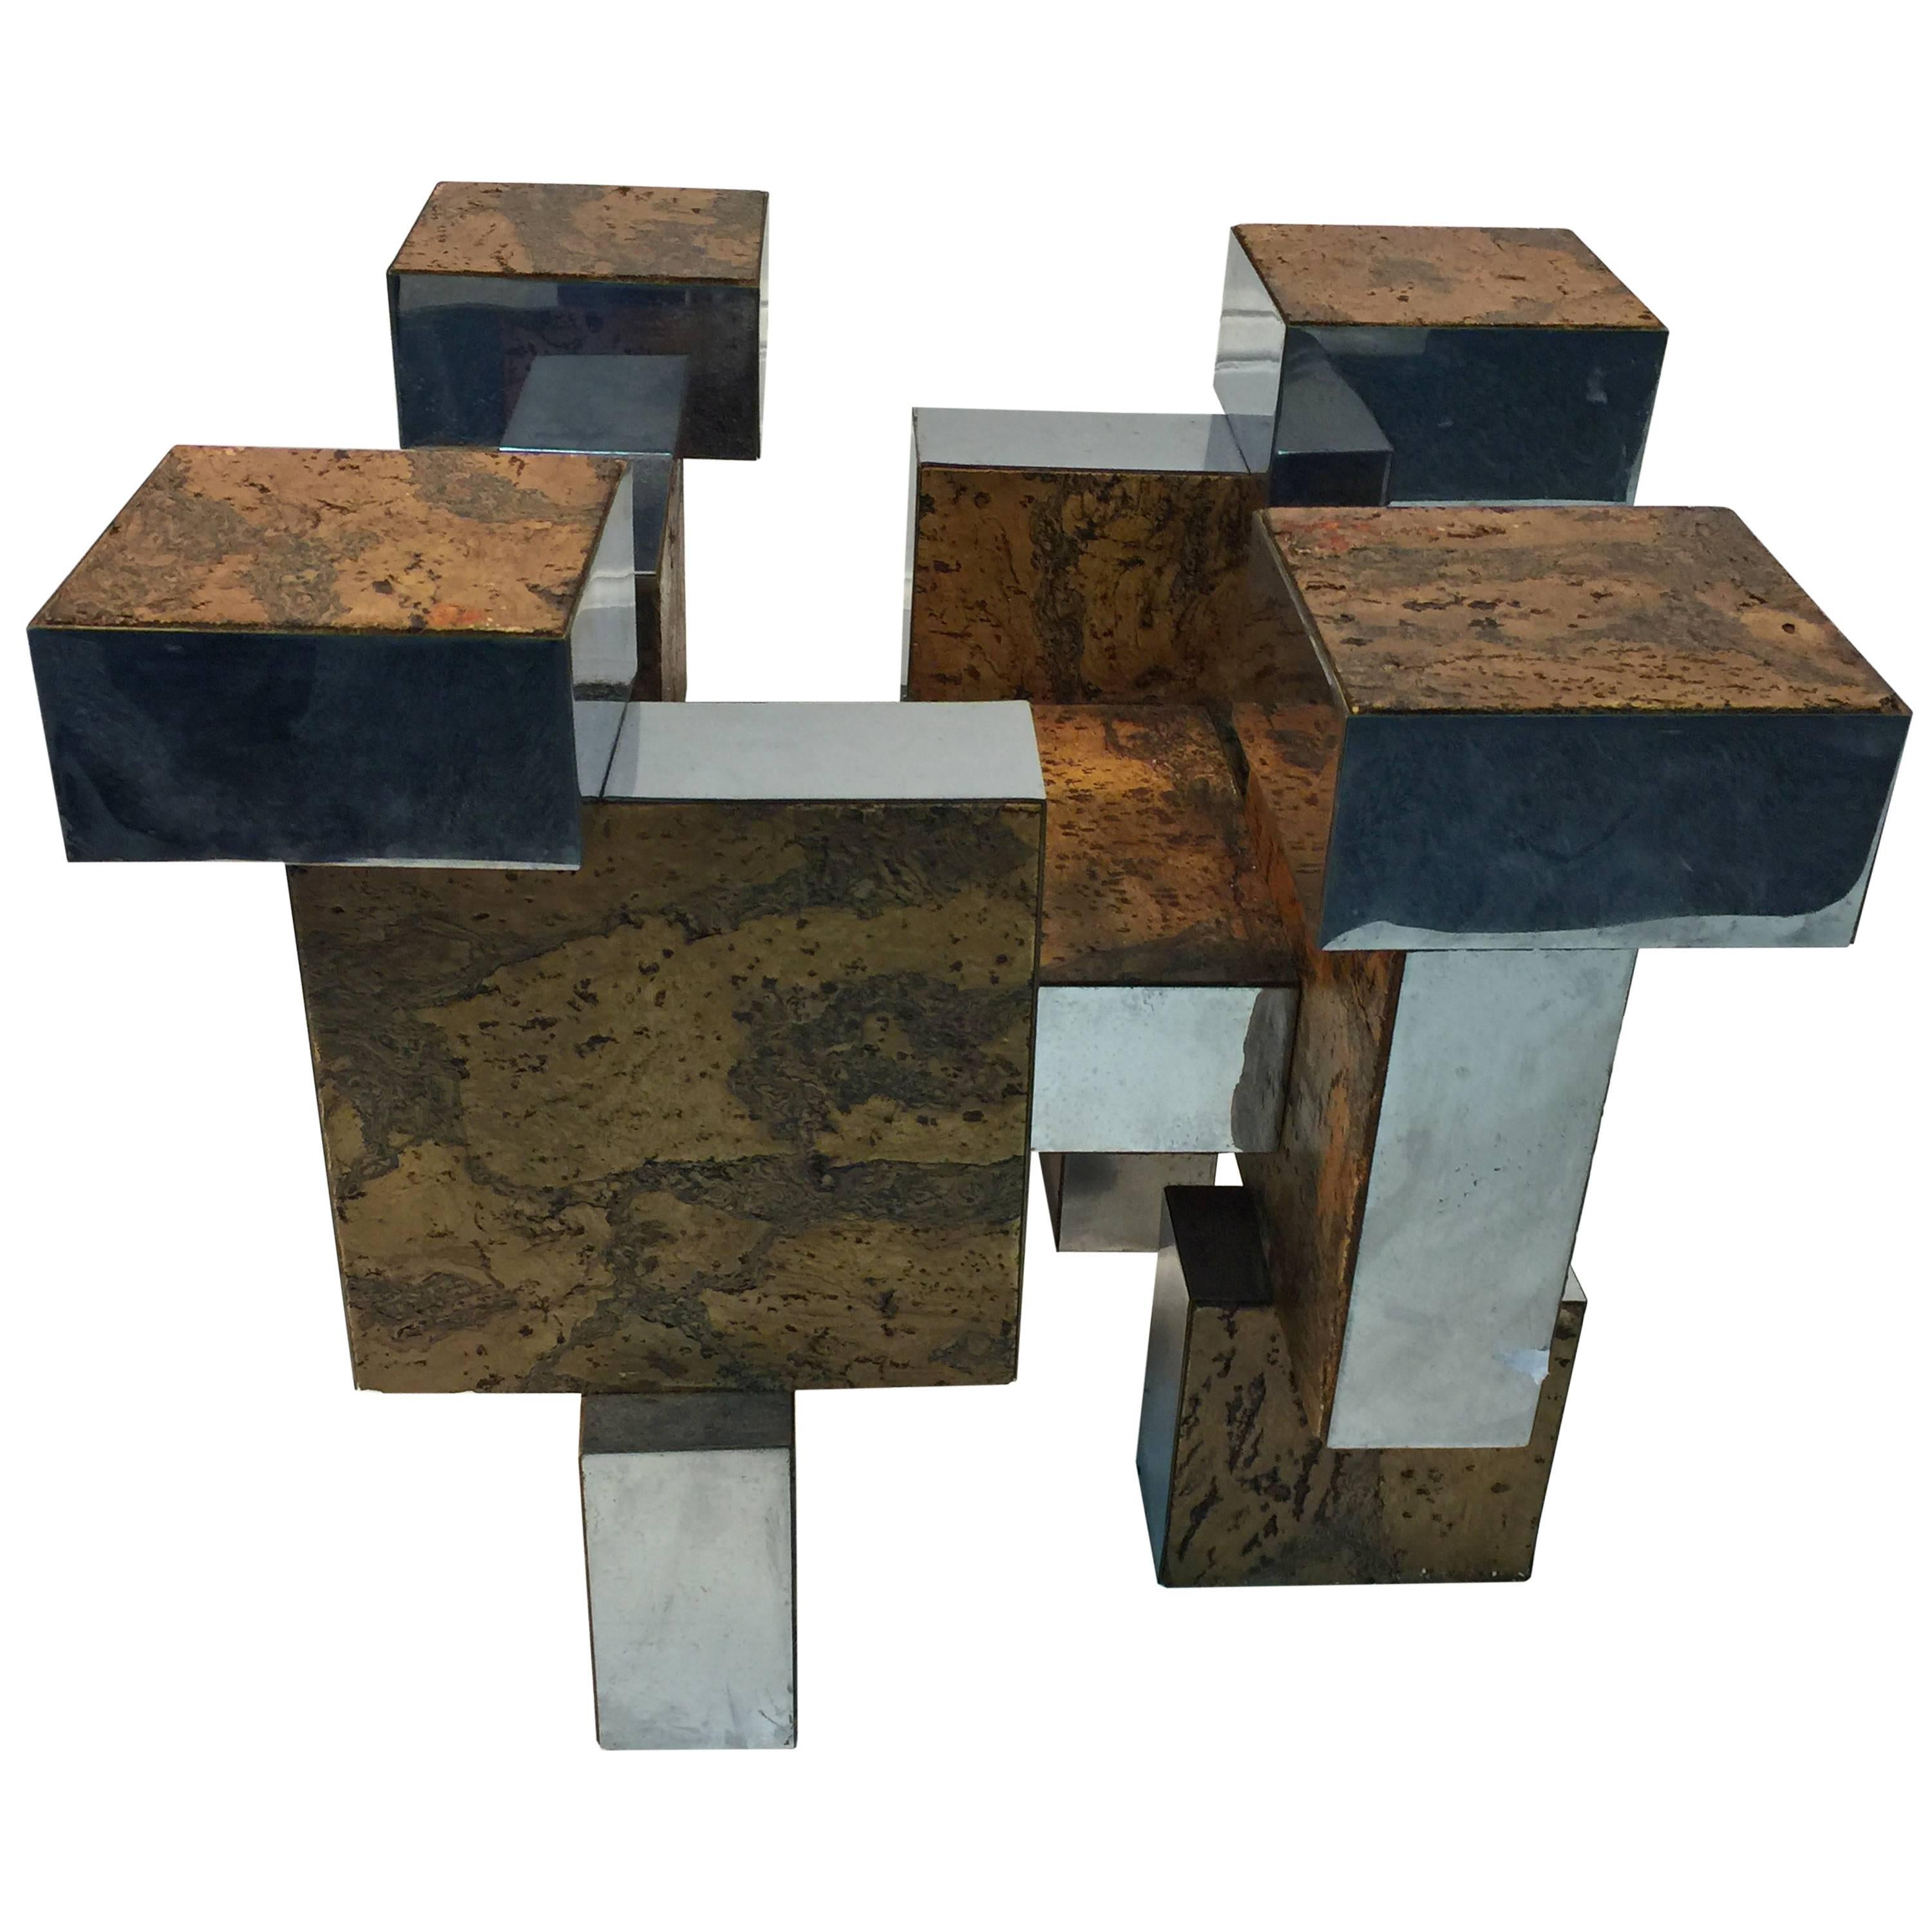 A Brutalist Paul Evans Cityscape burl wood and chrome coffee or cocktail table, circa 1970.

Measures base: 18.5 x 18 x 16 H.
Glass: 24 x 24..